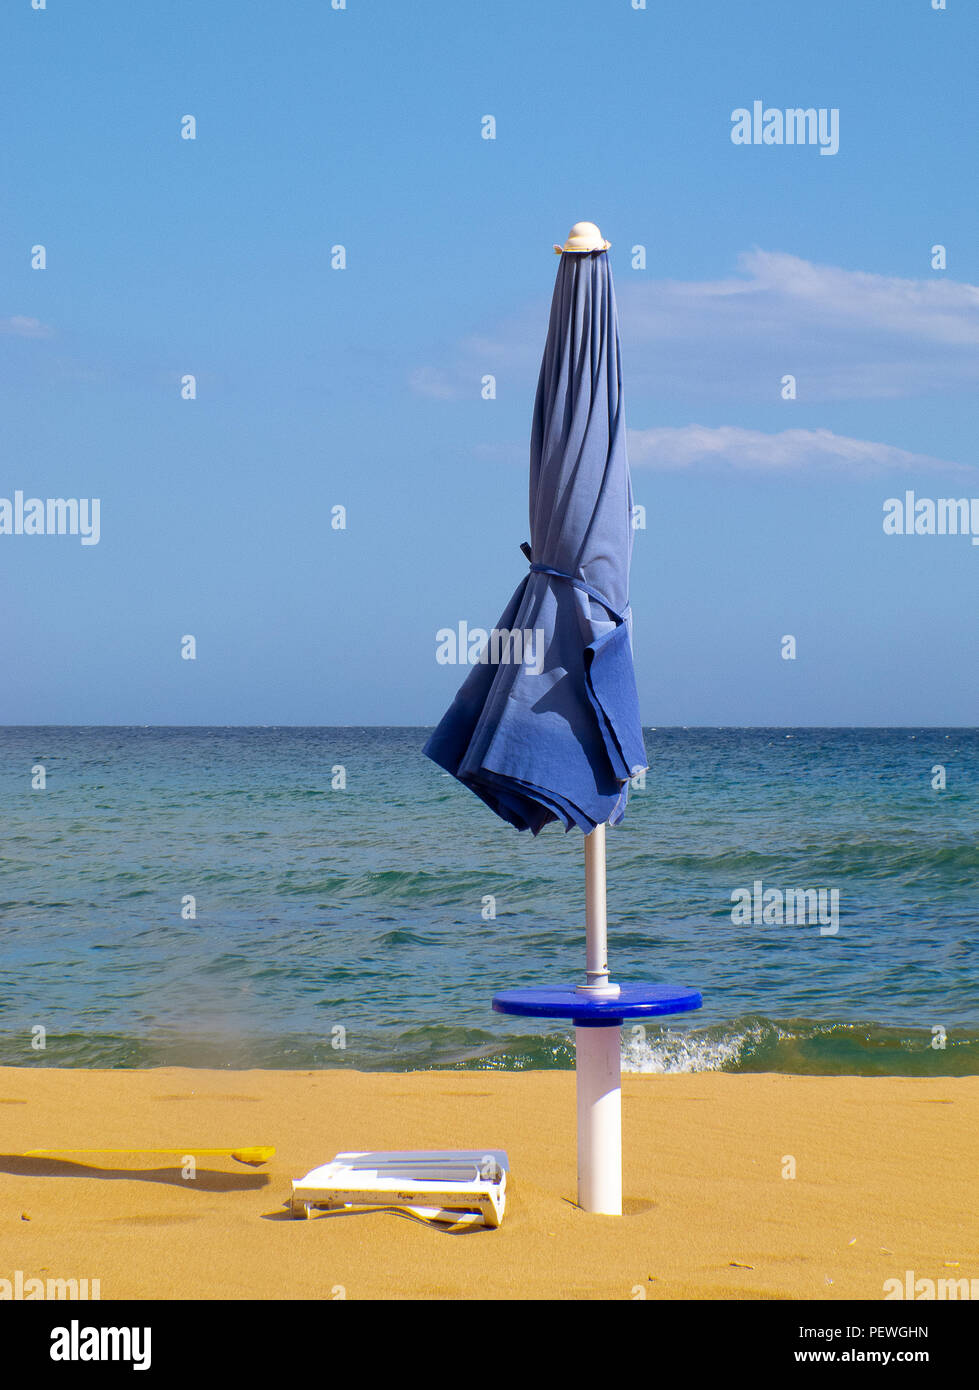 Calabria (Italy): closed beach umbrella with sky and blue sea in background Stock Photo